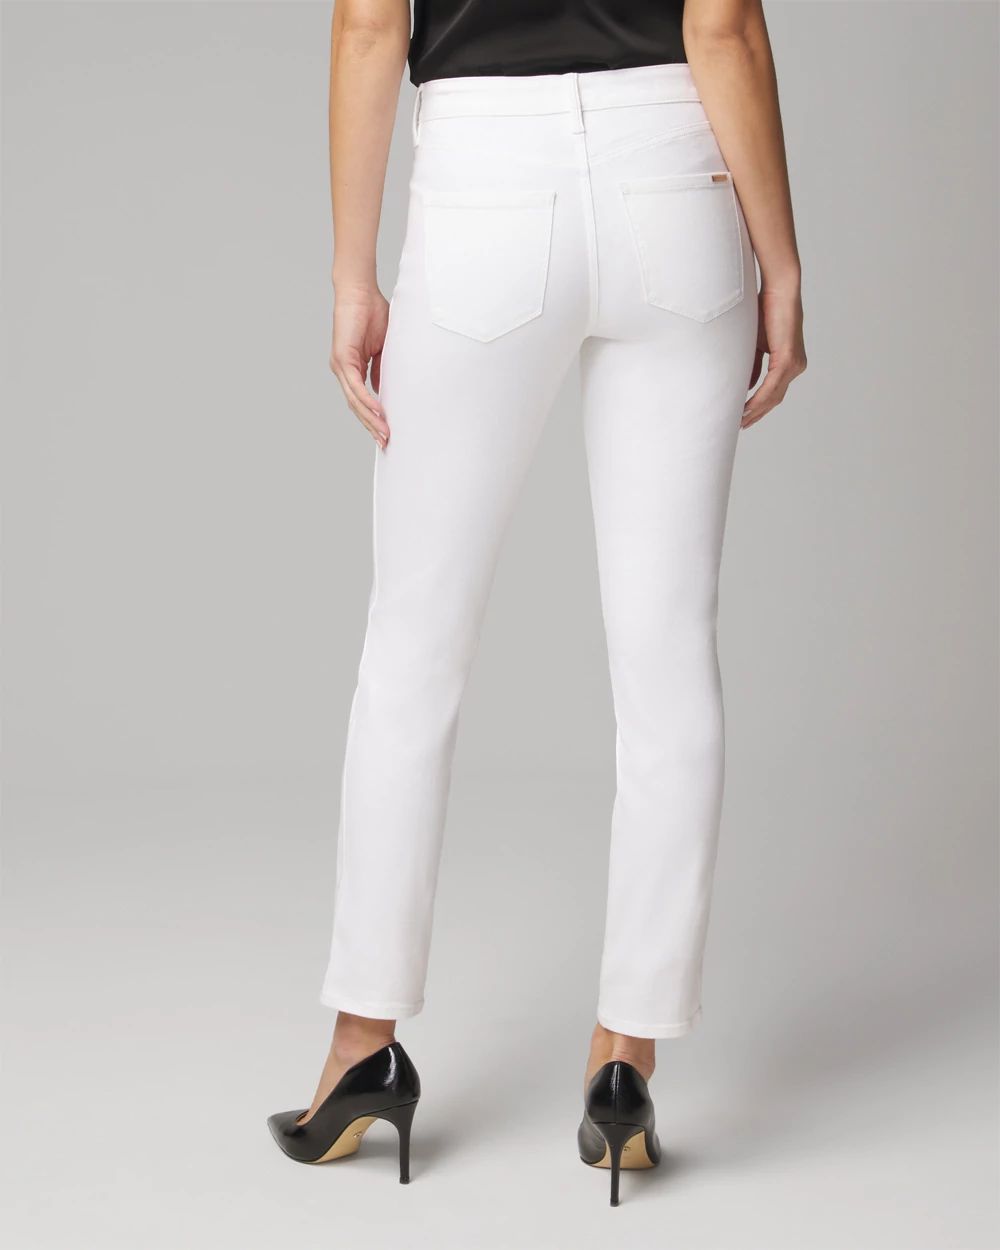 High-Rise White Straight Jeans click to view larger image.